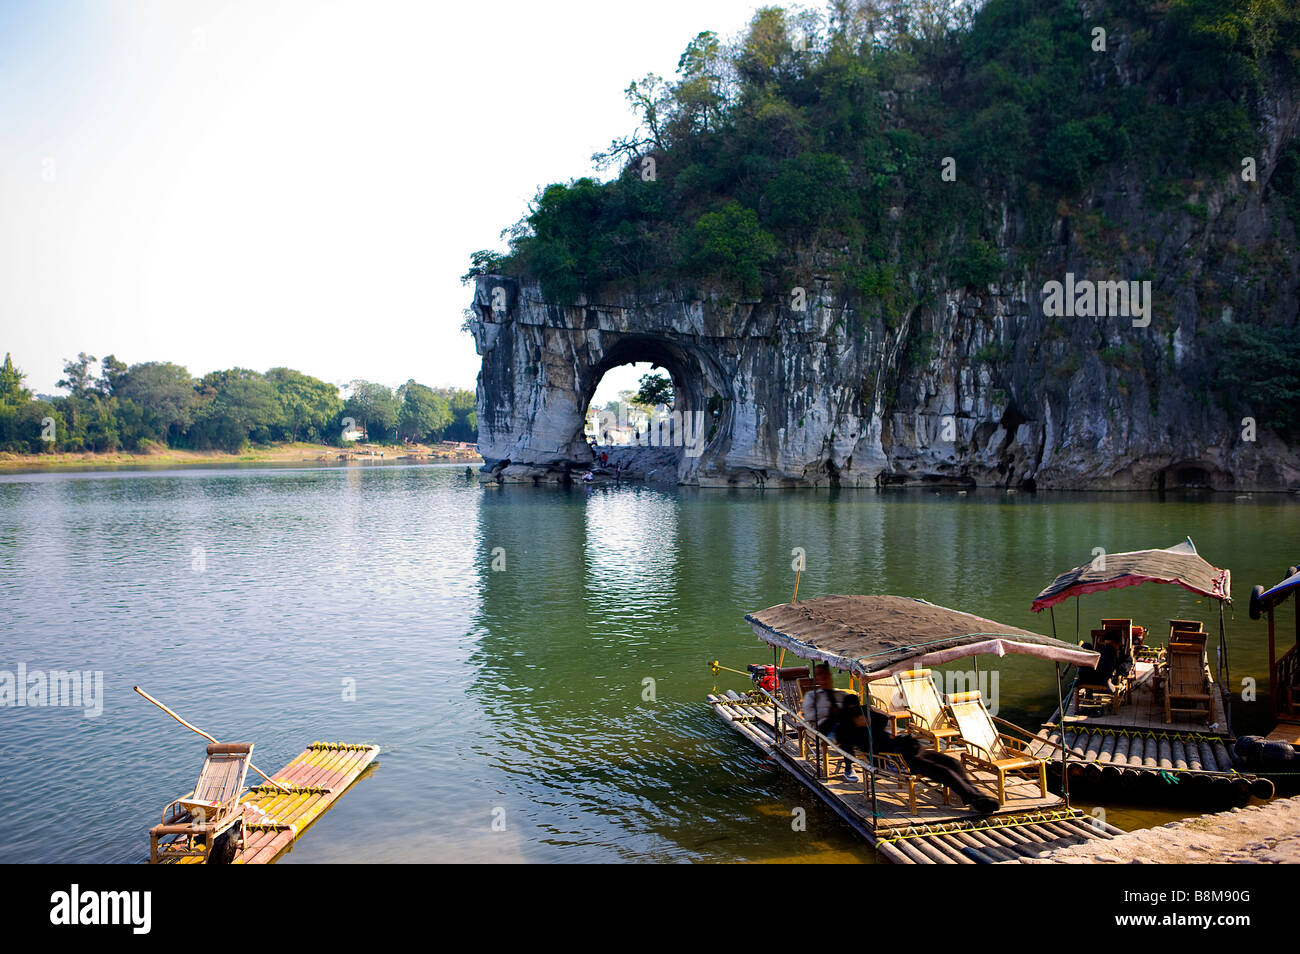 Natural scenery of Elephant Trunk Hill in Guilin Guangxi Province China Stock Photo